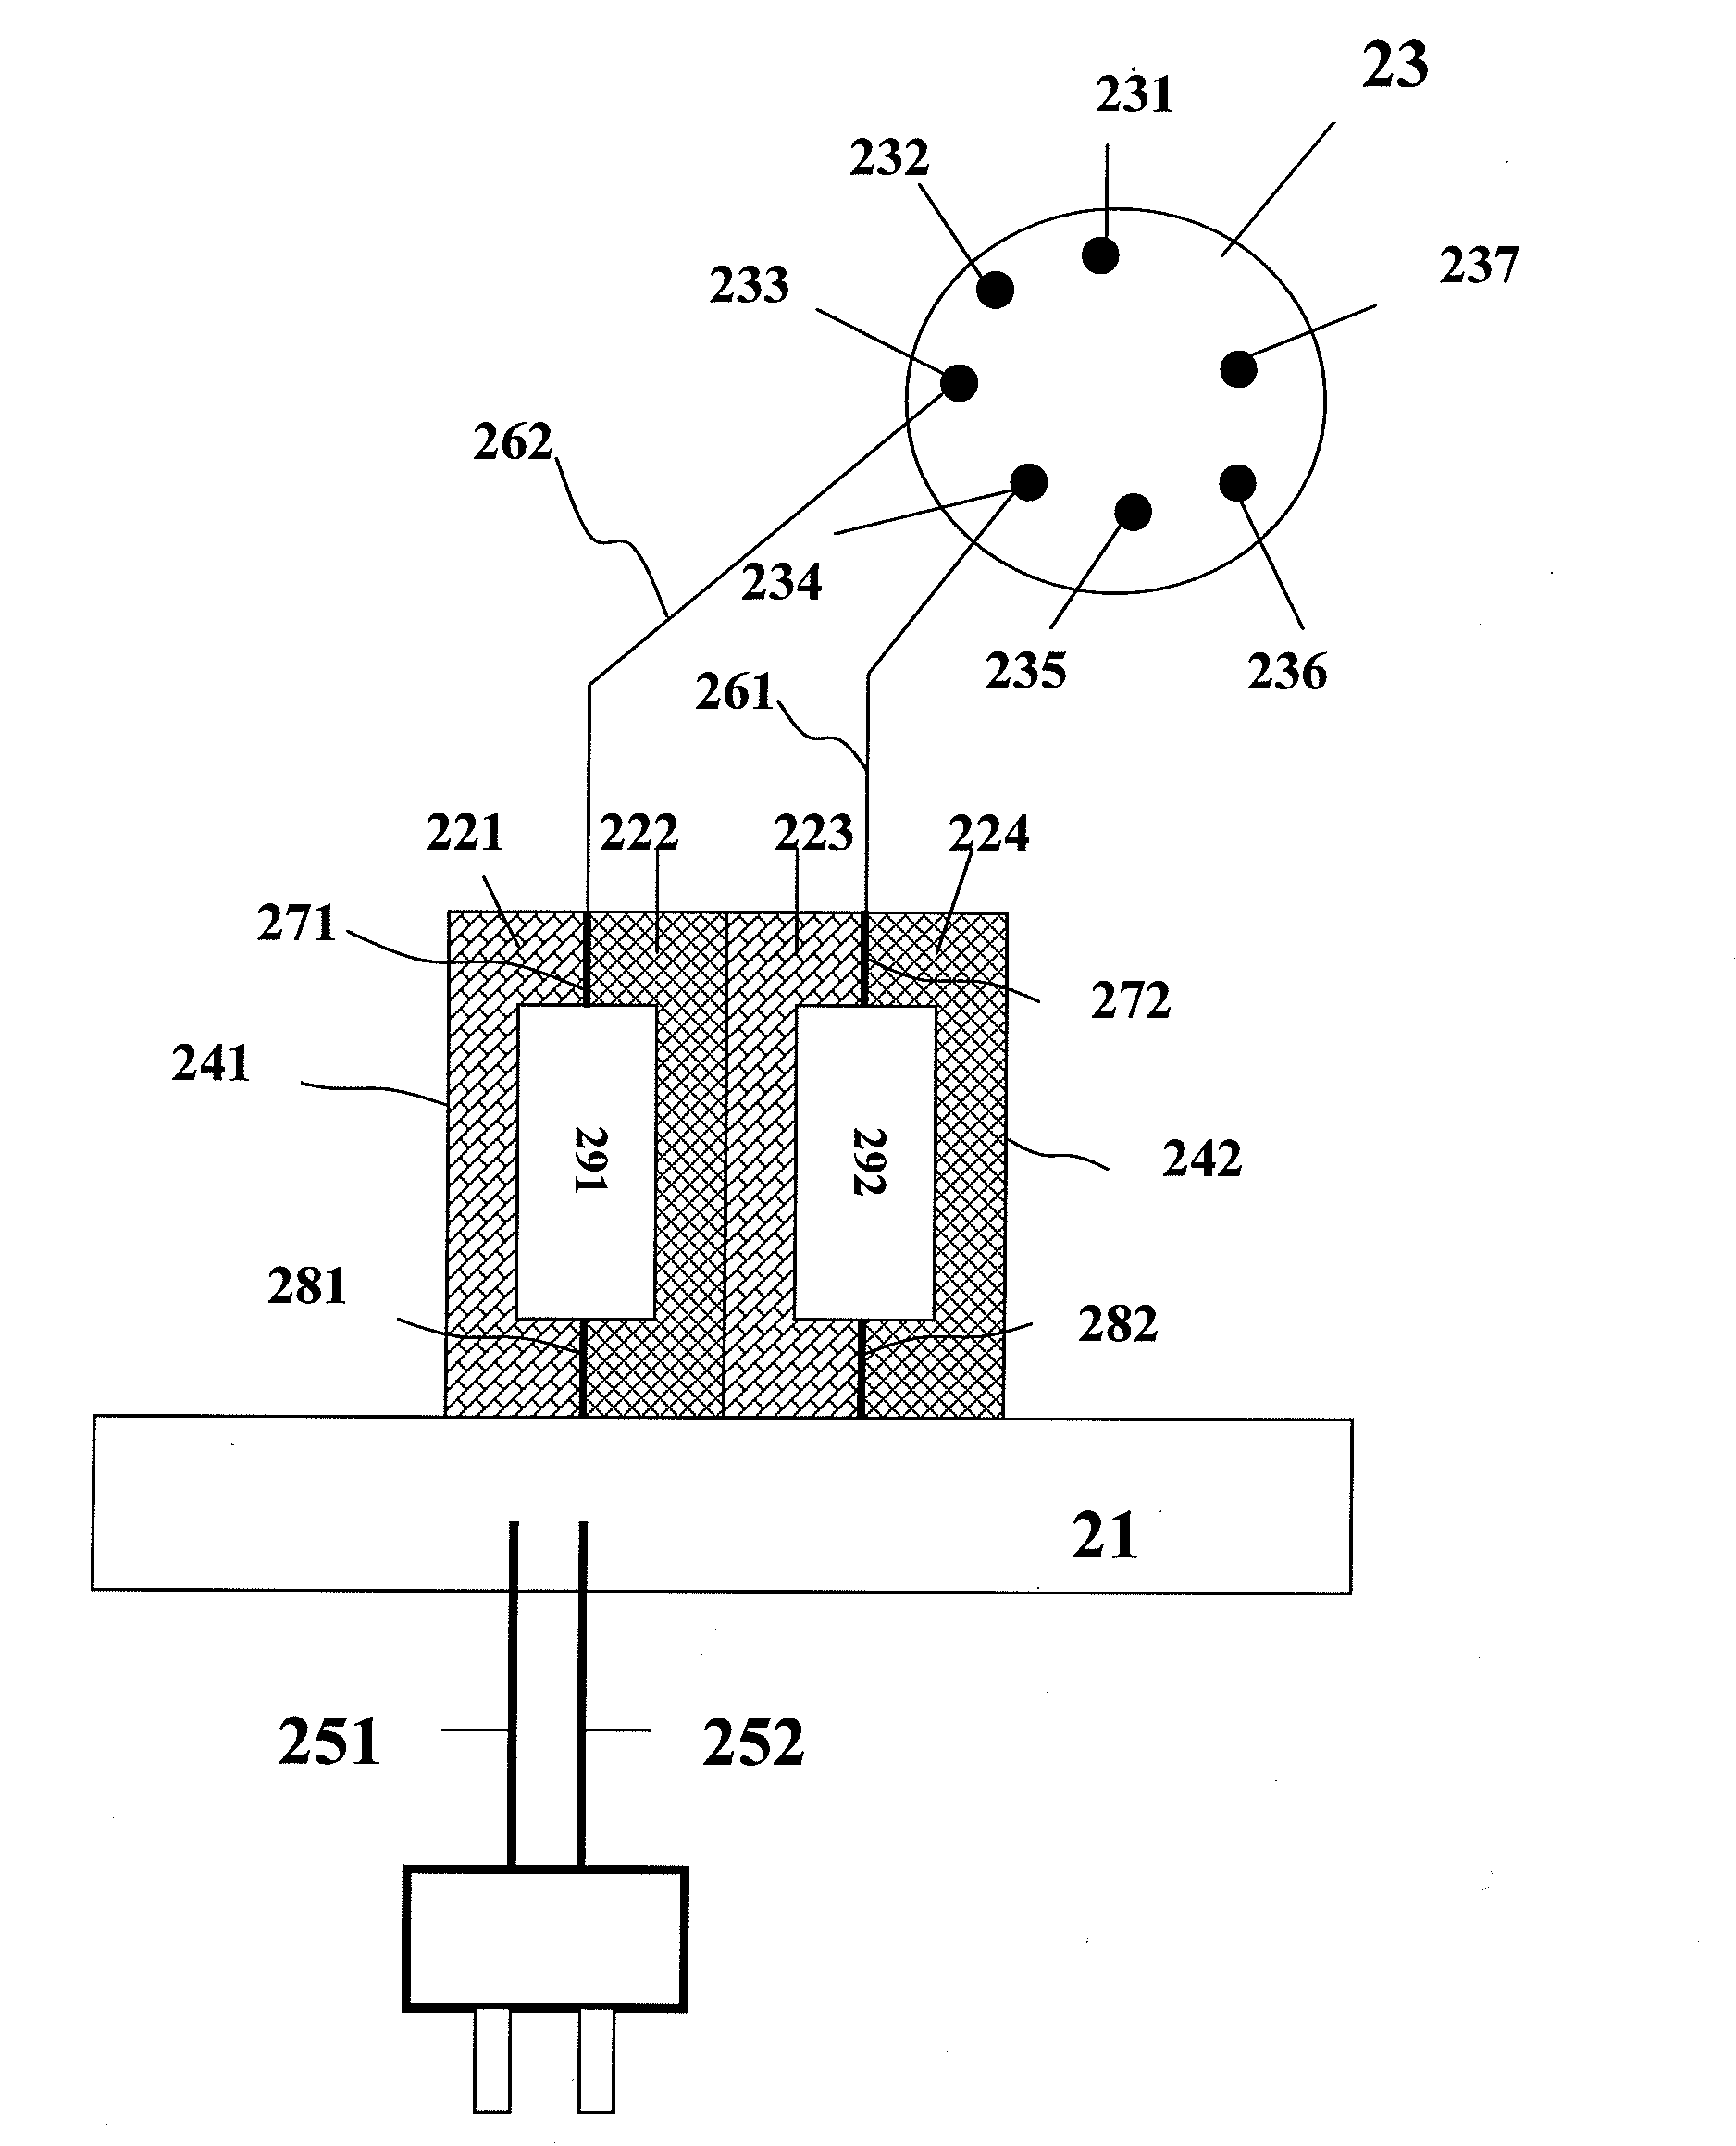 Individual-Charge and Merged-Discharge Battery Set